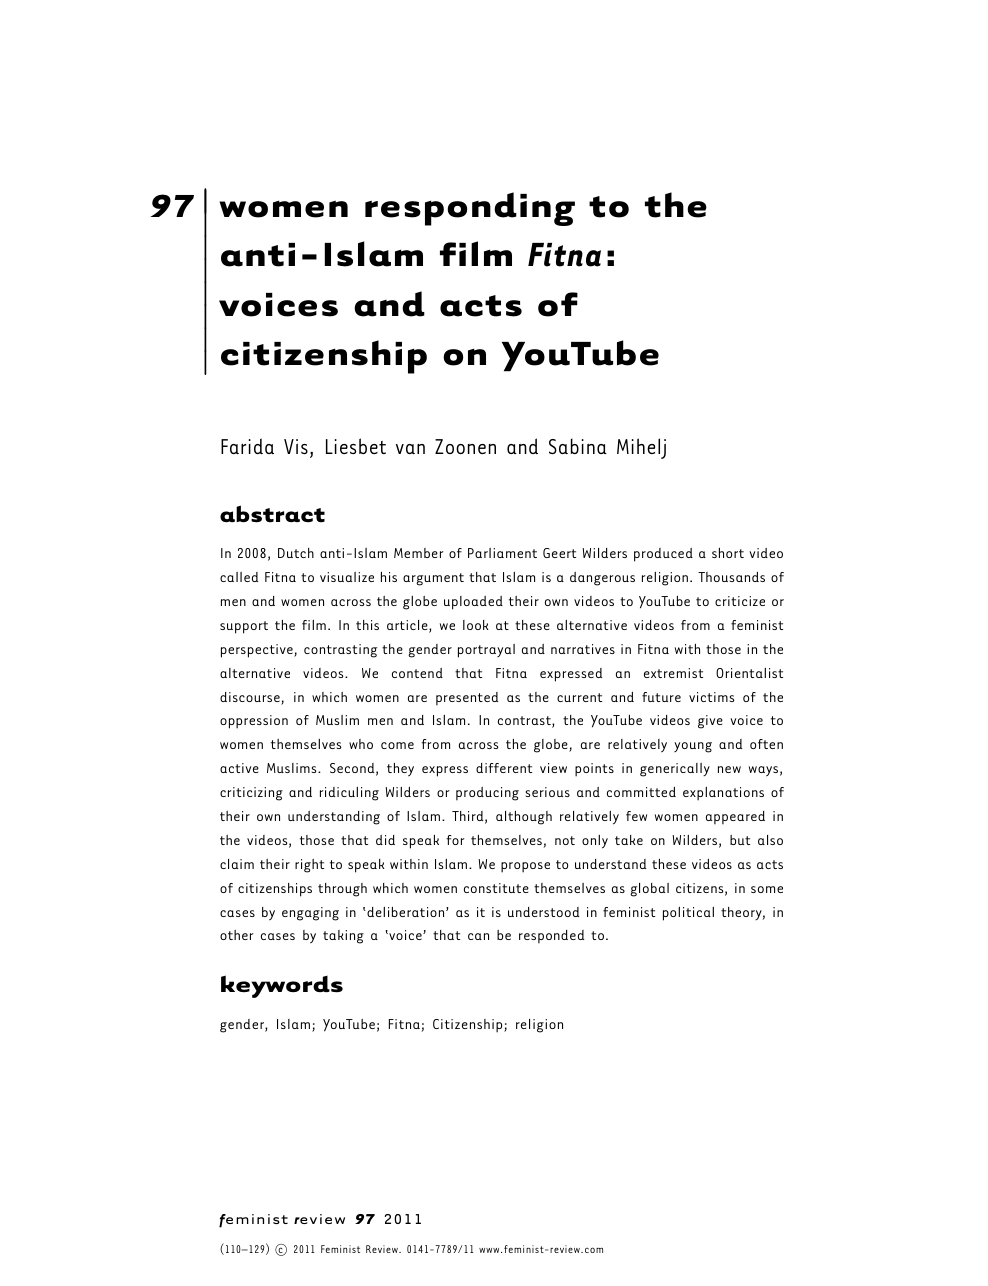 women responding to the anti-Islam film Fitna voices and acts of citizenship on YouTube